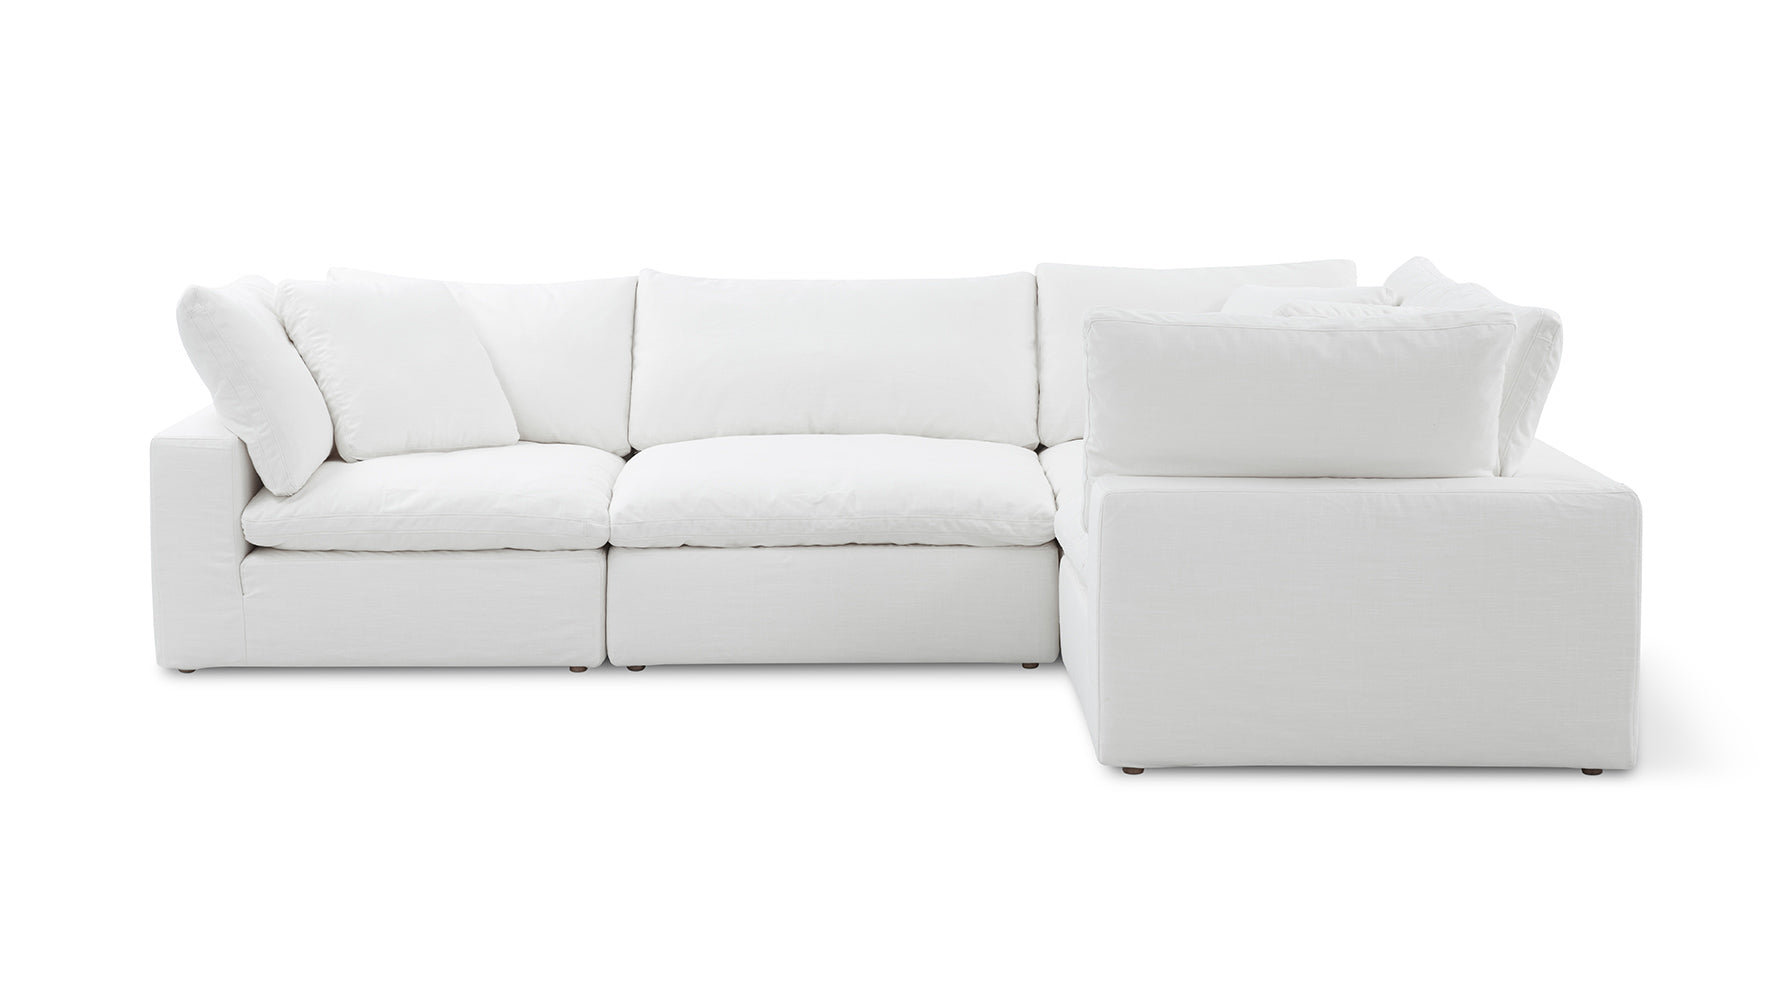 Movie Night™ 4-Piece Modular Sectional Closed, Standard, Brie - Image 1